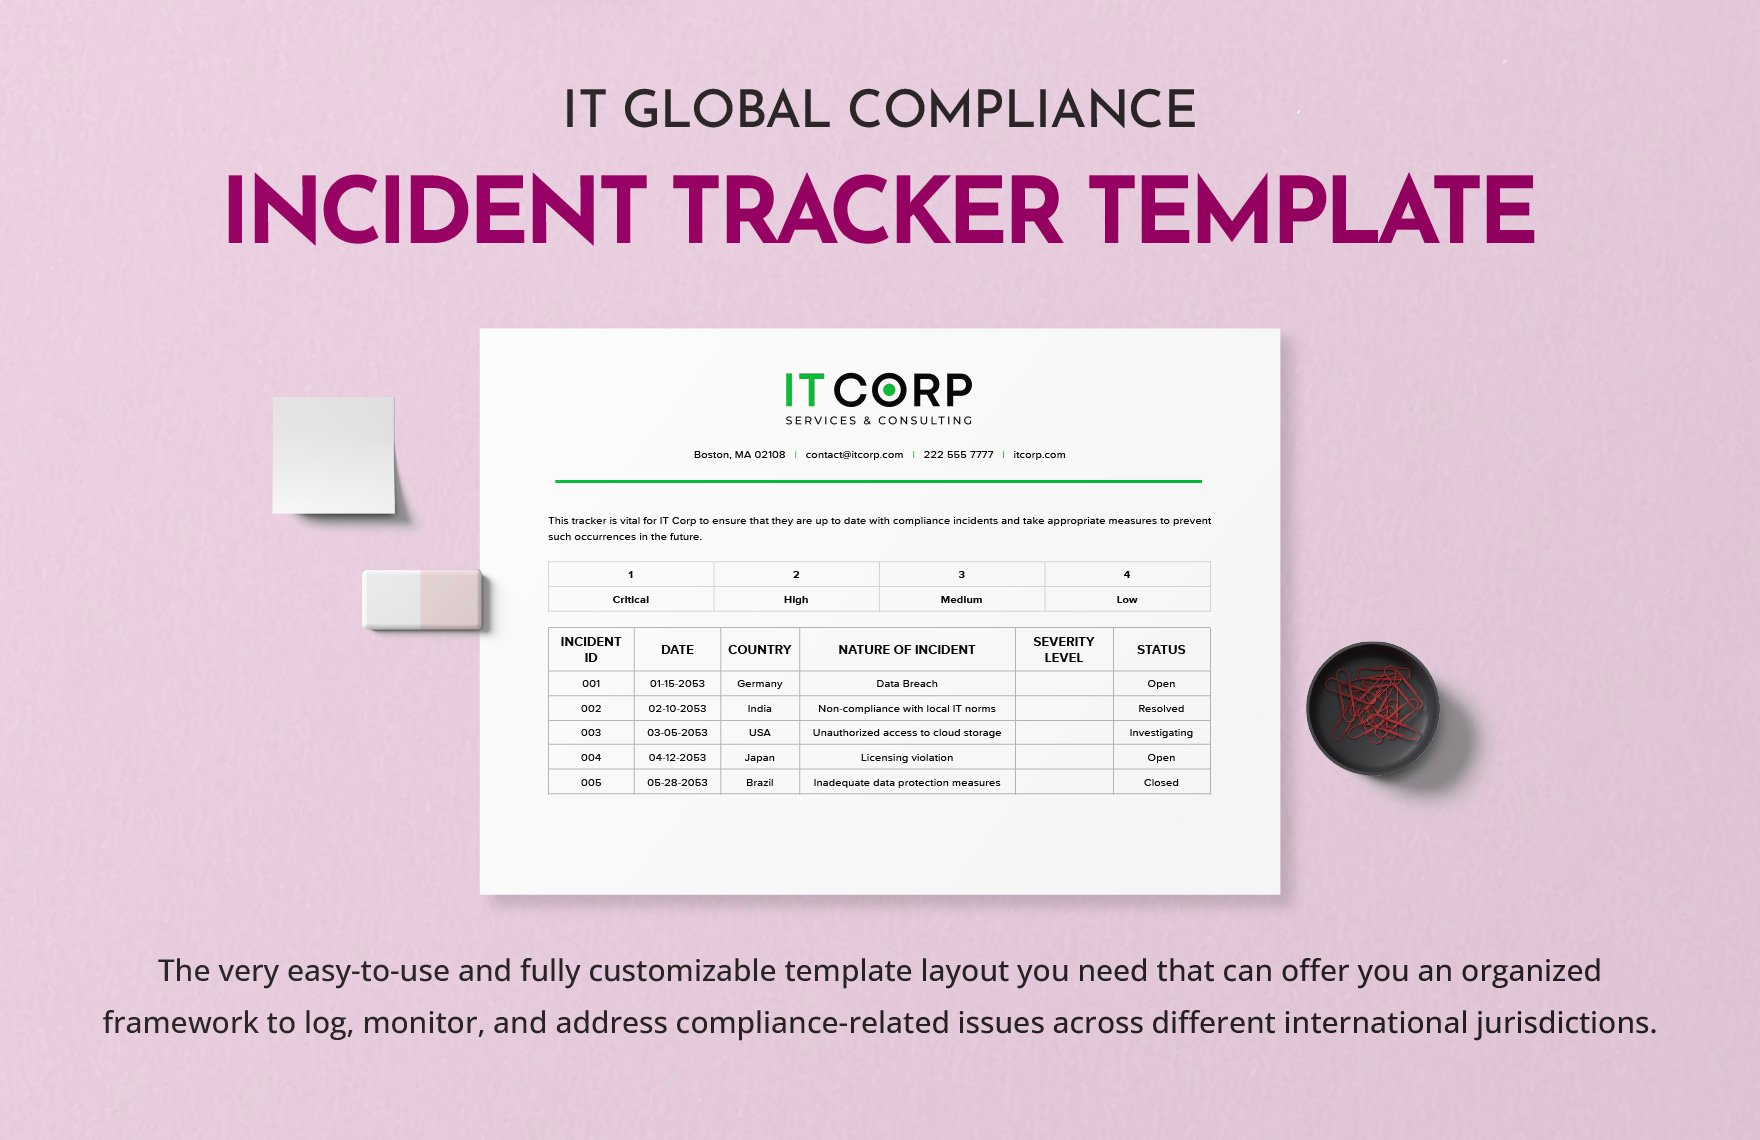 IT Global Compliance Incident Tracker Template